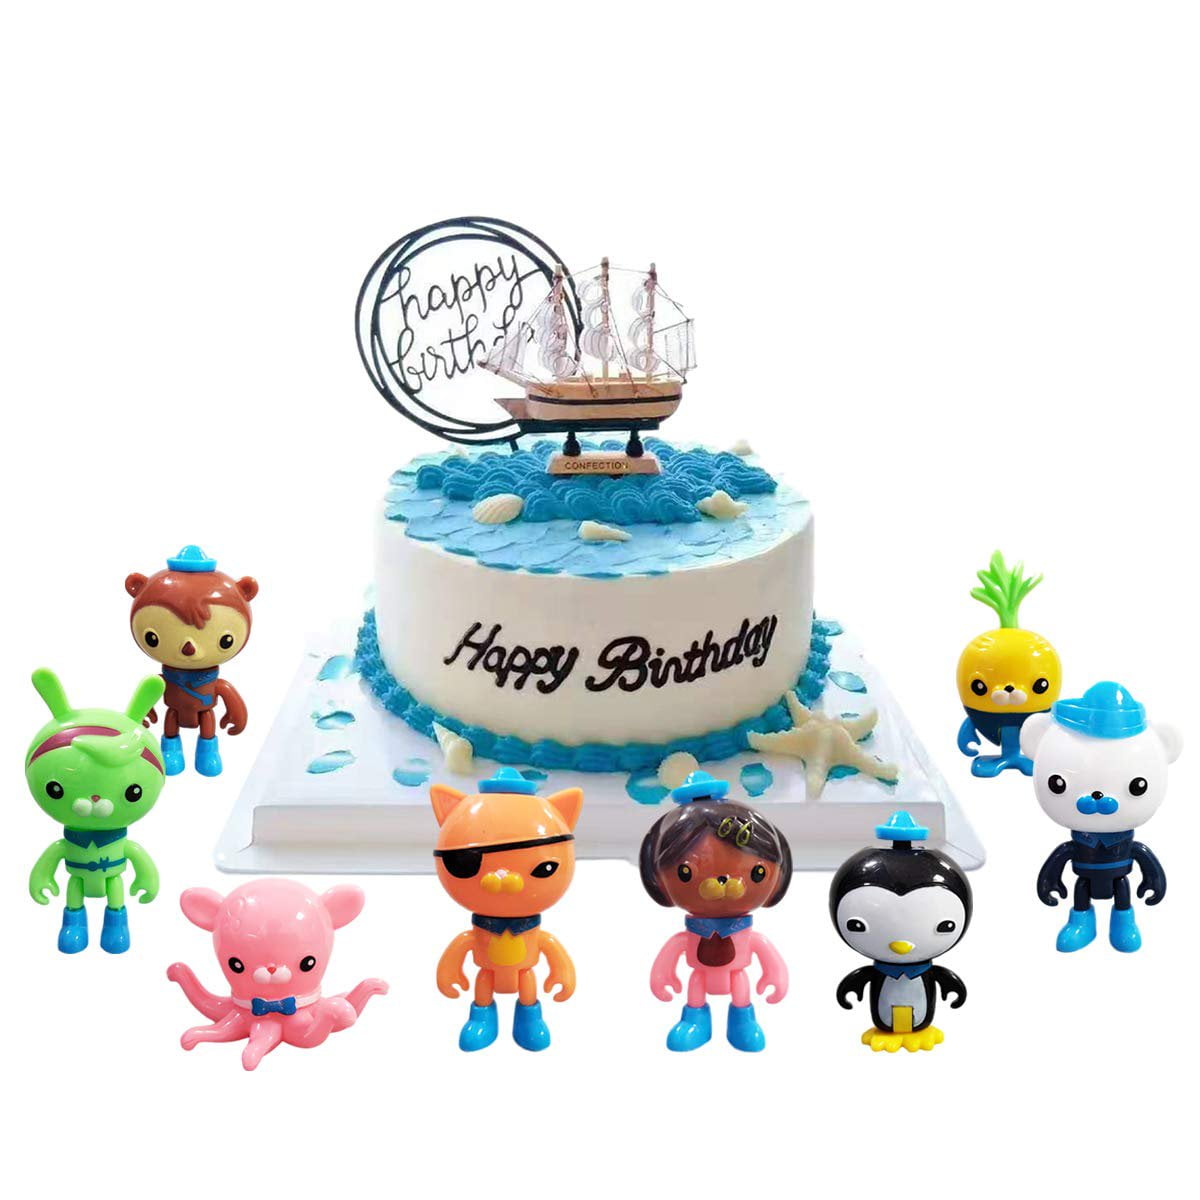 Wholesale DIHAO Octonauts Cake Topper Decorations Children Mini Toys Peso  Kwazii Captain Barnacles Cupcake Toppers for Birthday Party Supp From  m.alibaba.com